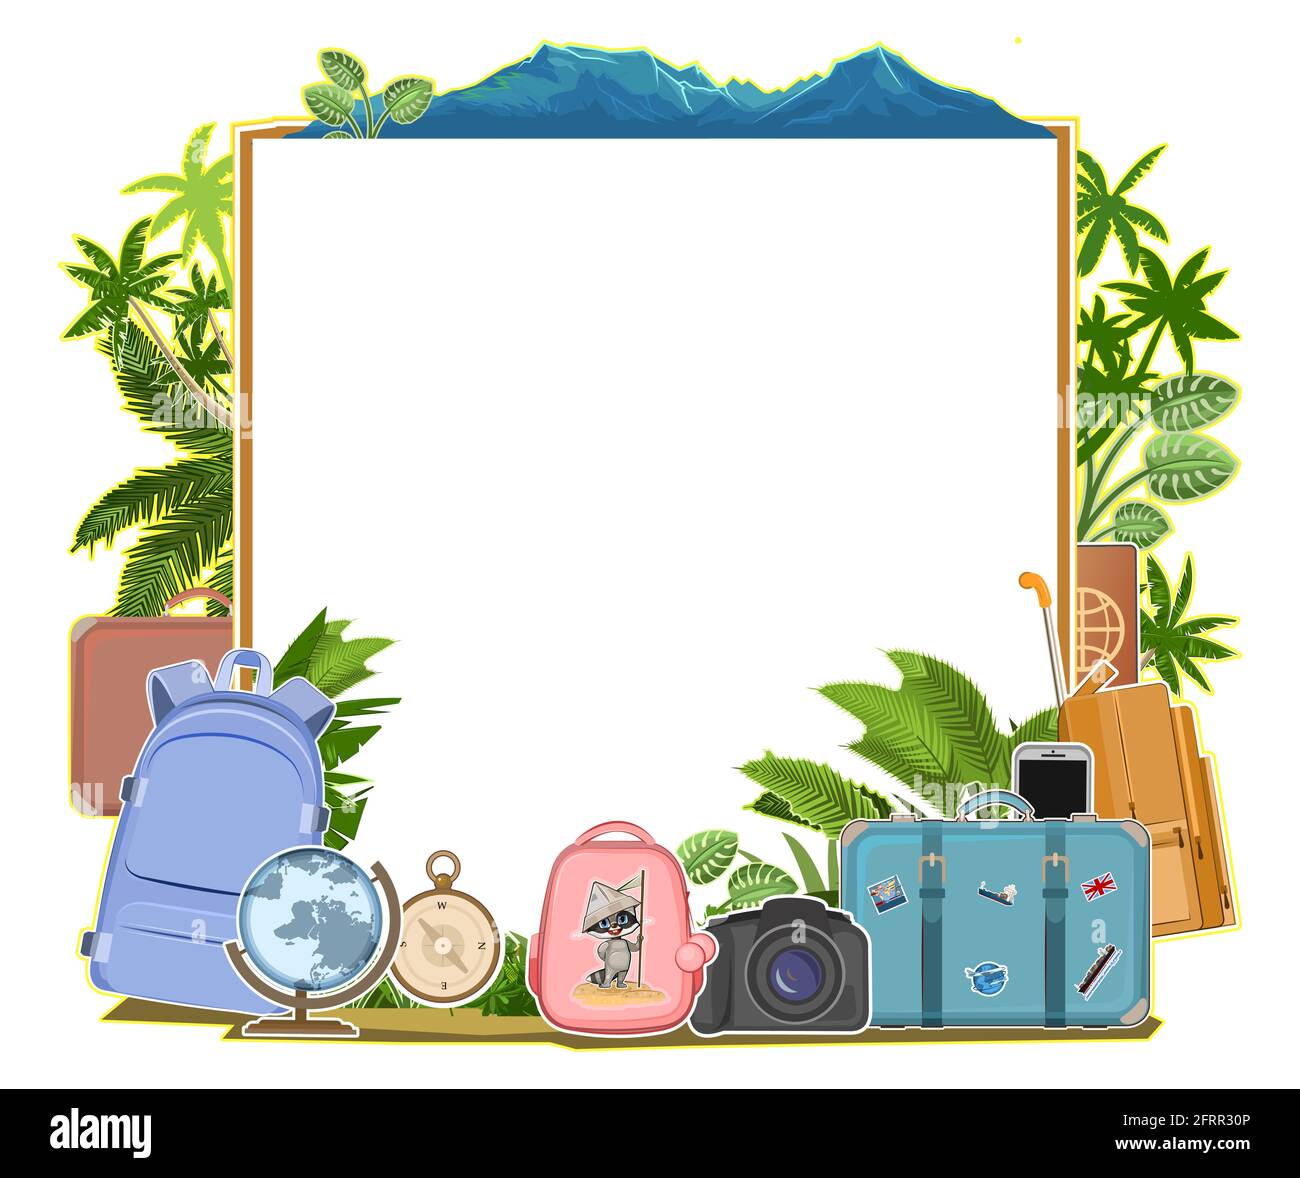 Tourism. Luggage suitcases. Traveling around the world. Design concept. Place for rext. Postcard, banner Isolated. Travel, adventure elements with bag Stock Vector